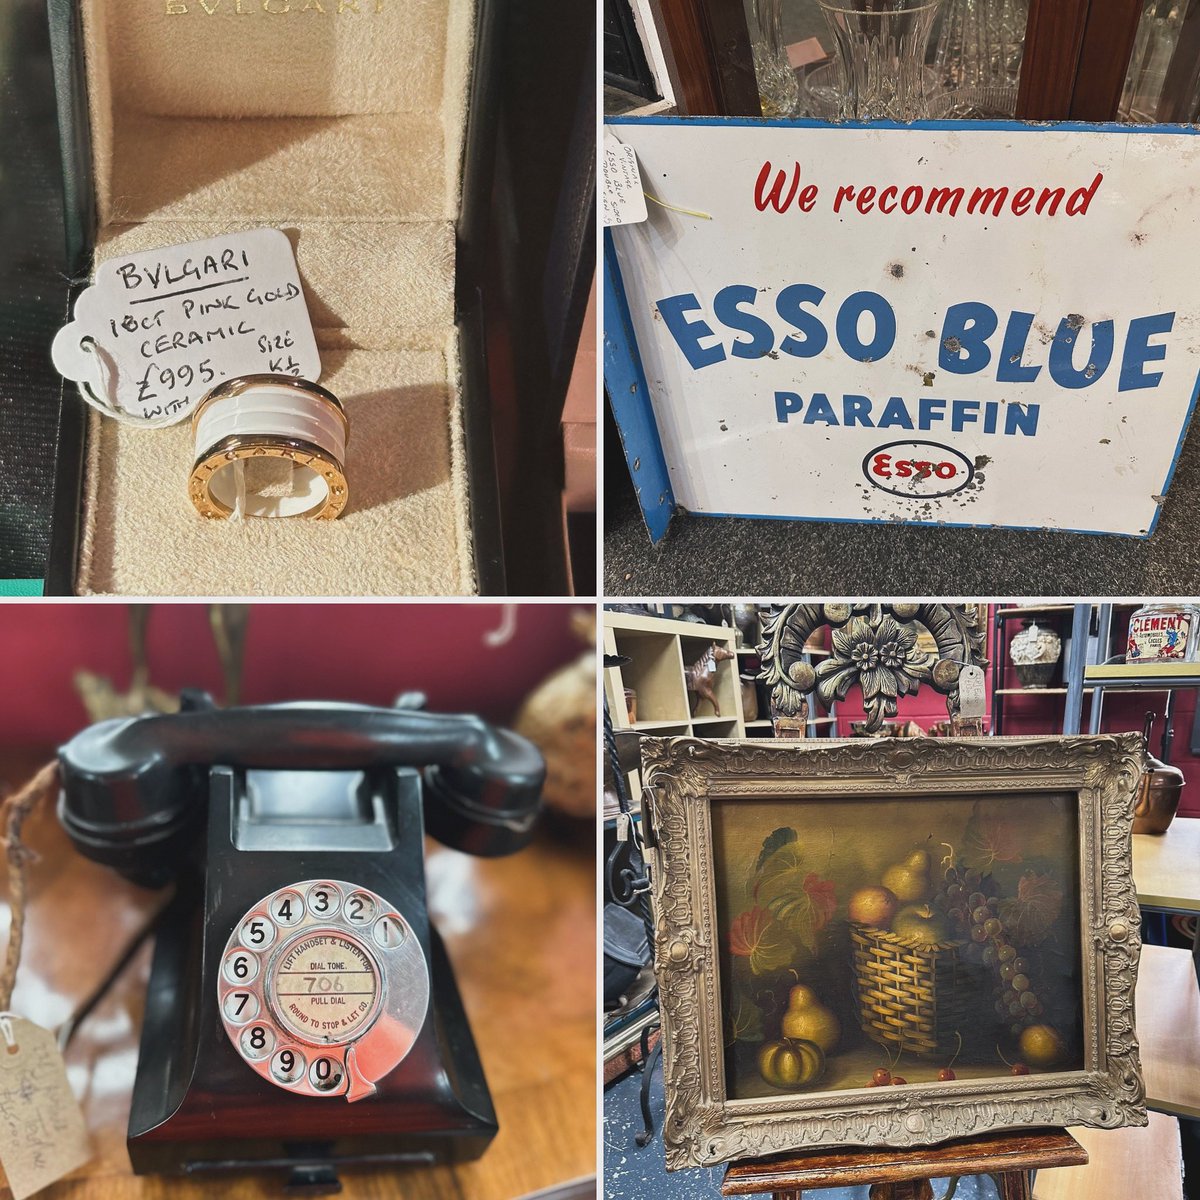 Good morning! The coffee is on in our #decodencecafe ready to open for 10am see you soon. 
Open 10-5pm 
#antiquescentre #astraantiquescentre #hemswell #lincolnshire #vintageadvertising #vintagetelephone #bulgariring #bulgarijewelry #esso #oilpainting #essooil